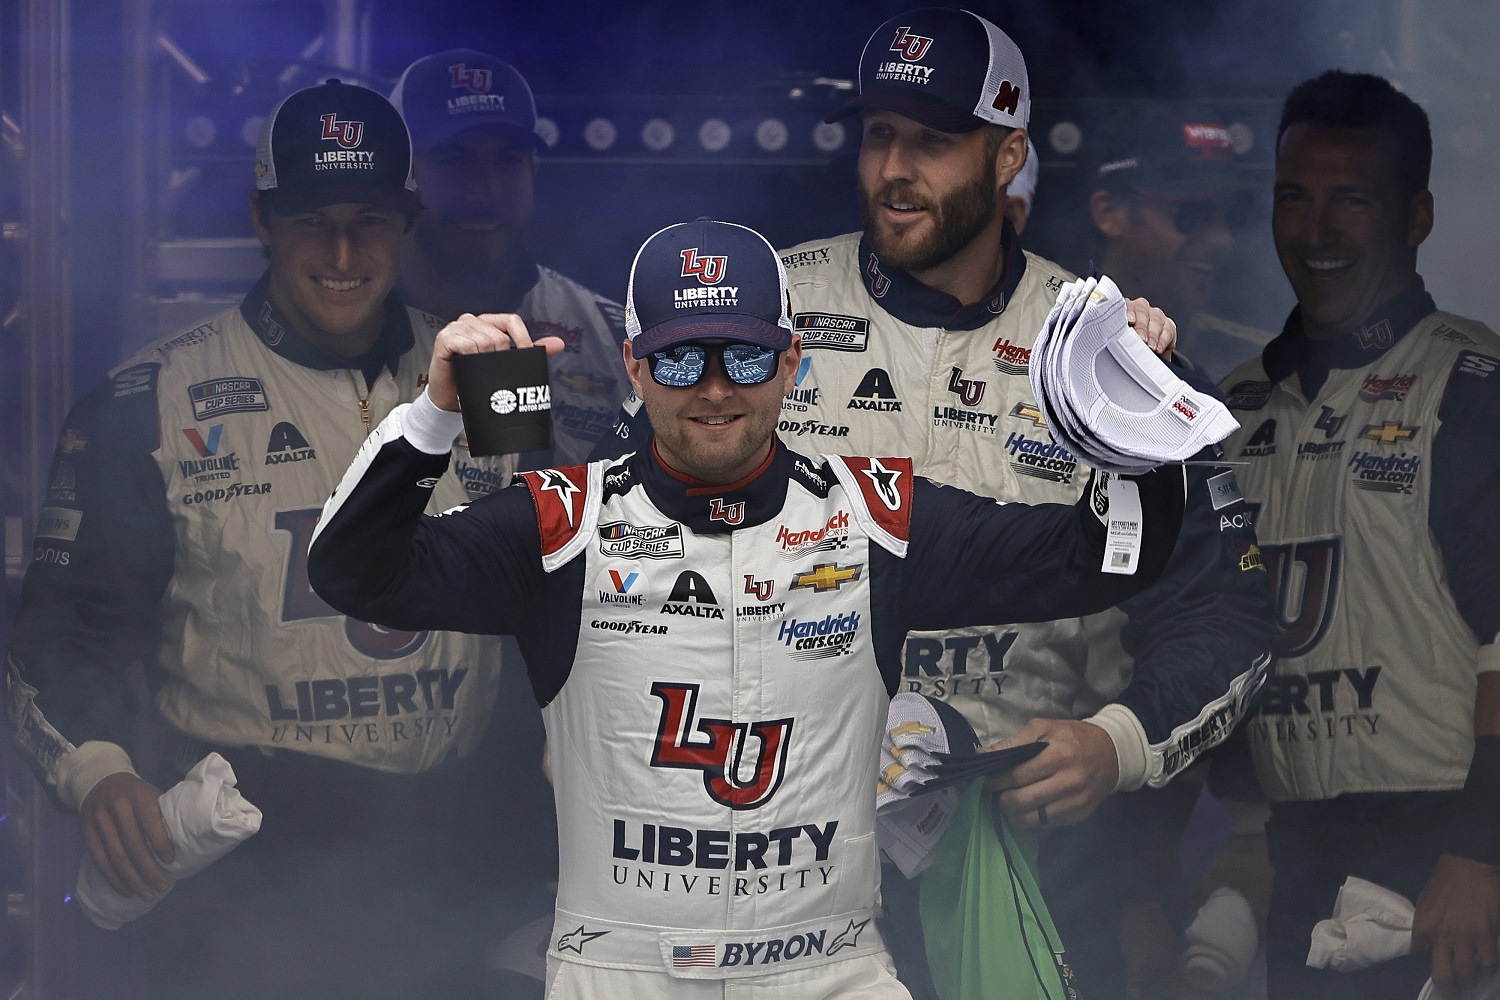 William Byron and crew walk onstage during driver intros prior to the NASCAR Cup Series All-Star Race at Texas Motor Speedway on May 22, 2022. | Buda Mendes/Getty Images